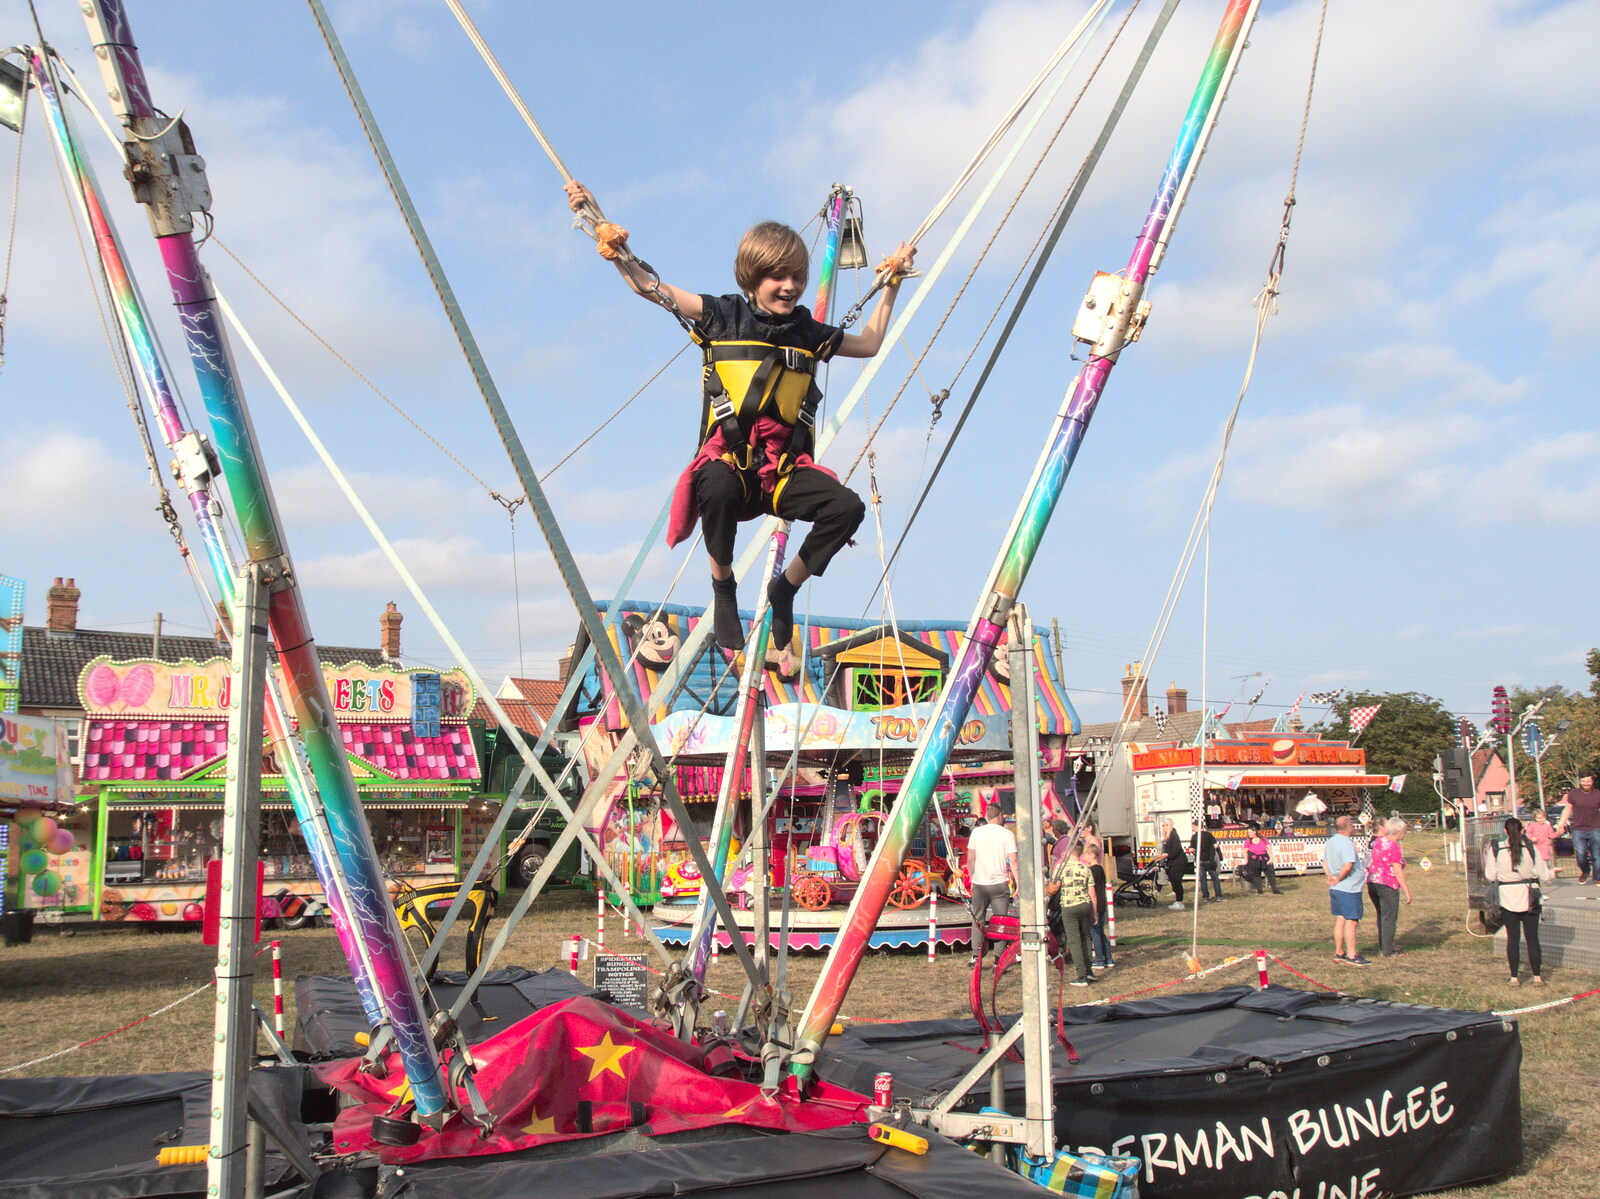 Harry has a bounce from A Few Hours at the Fair, Fair Green, Diss, Norfolk - 5th September 2021